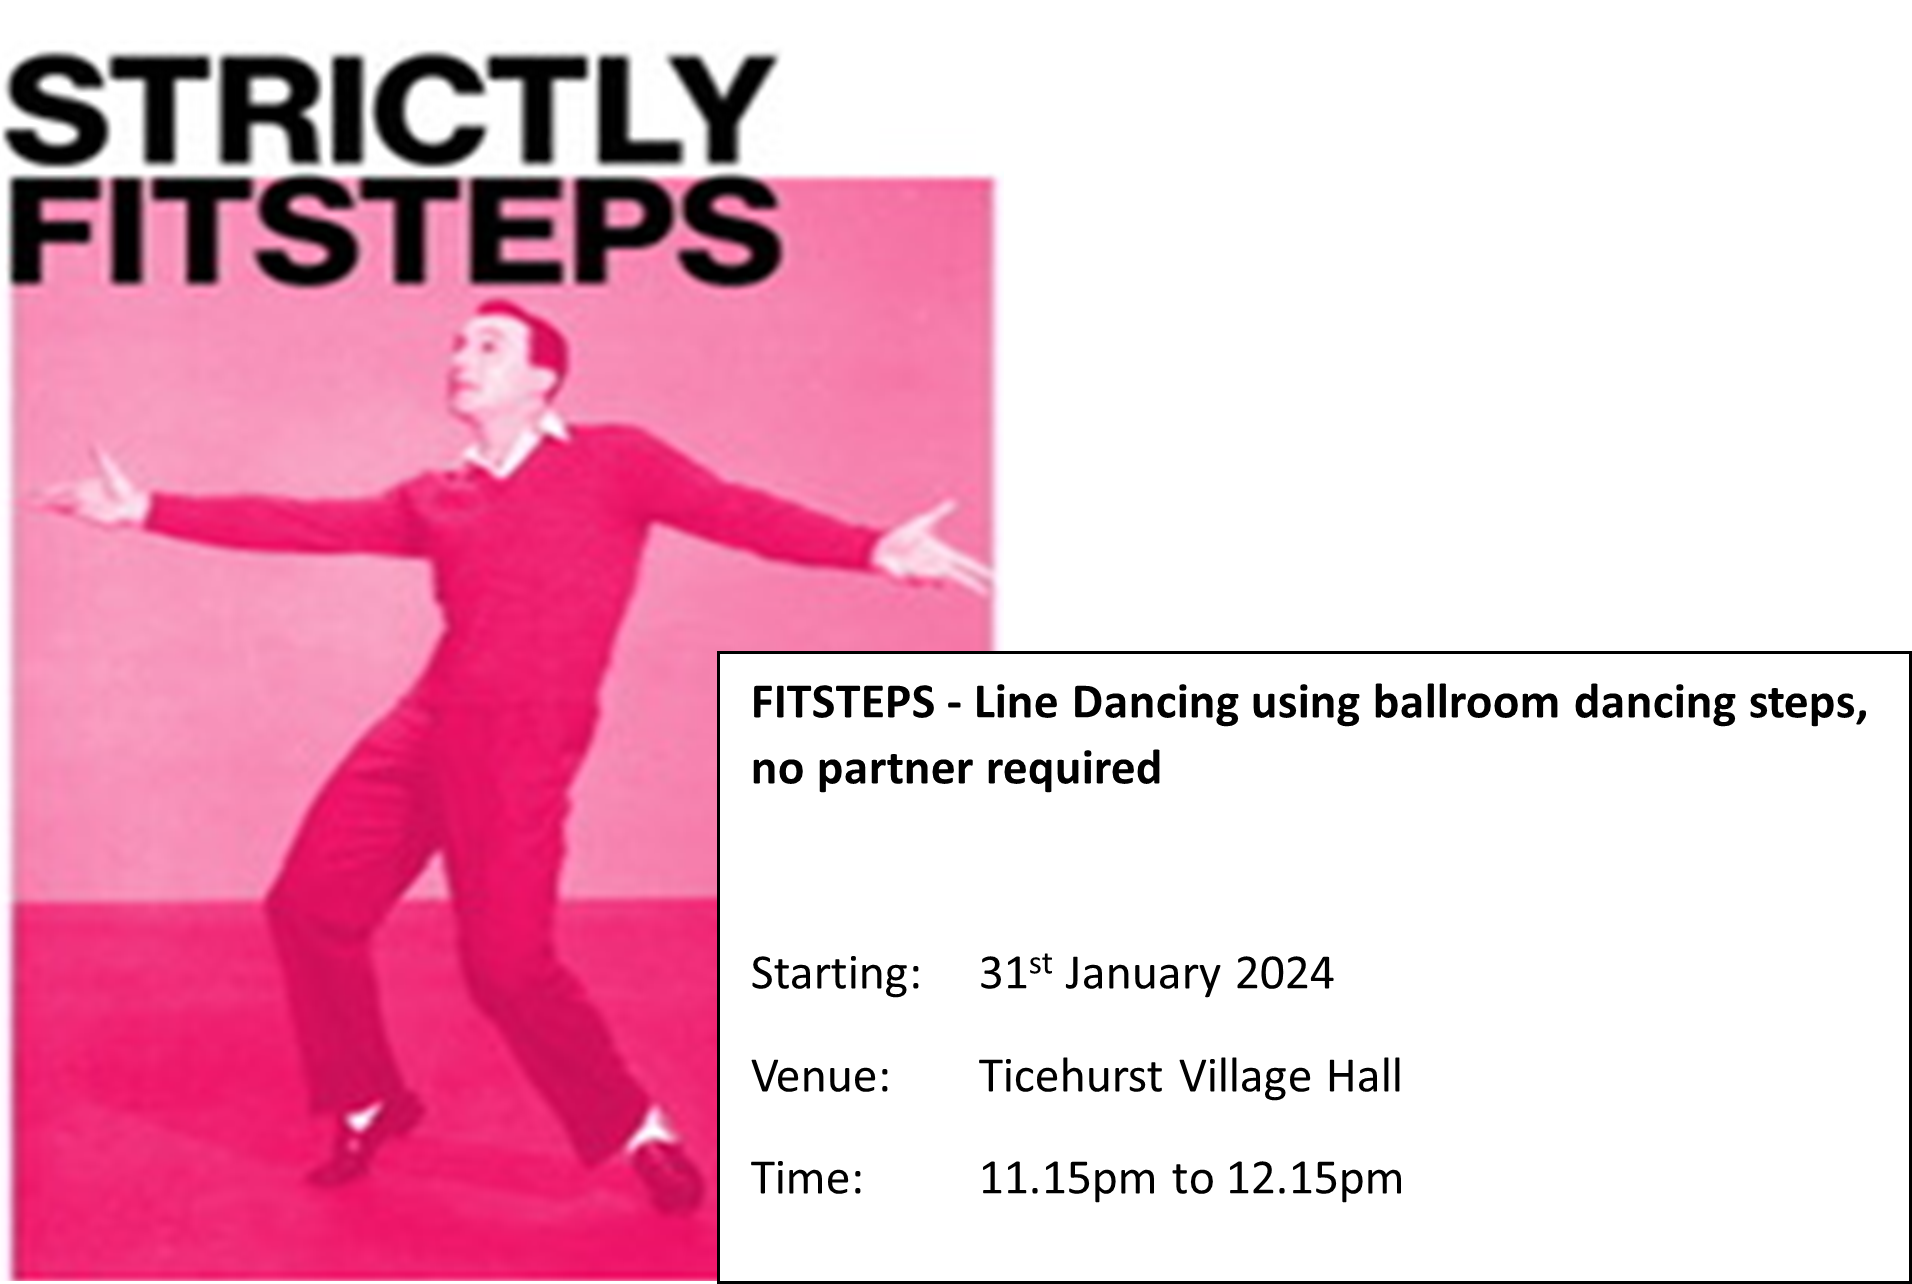 Strictly Fitstep